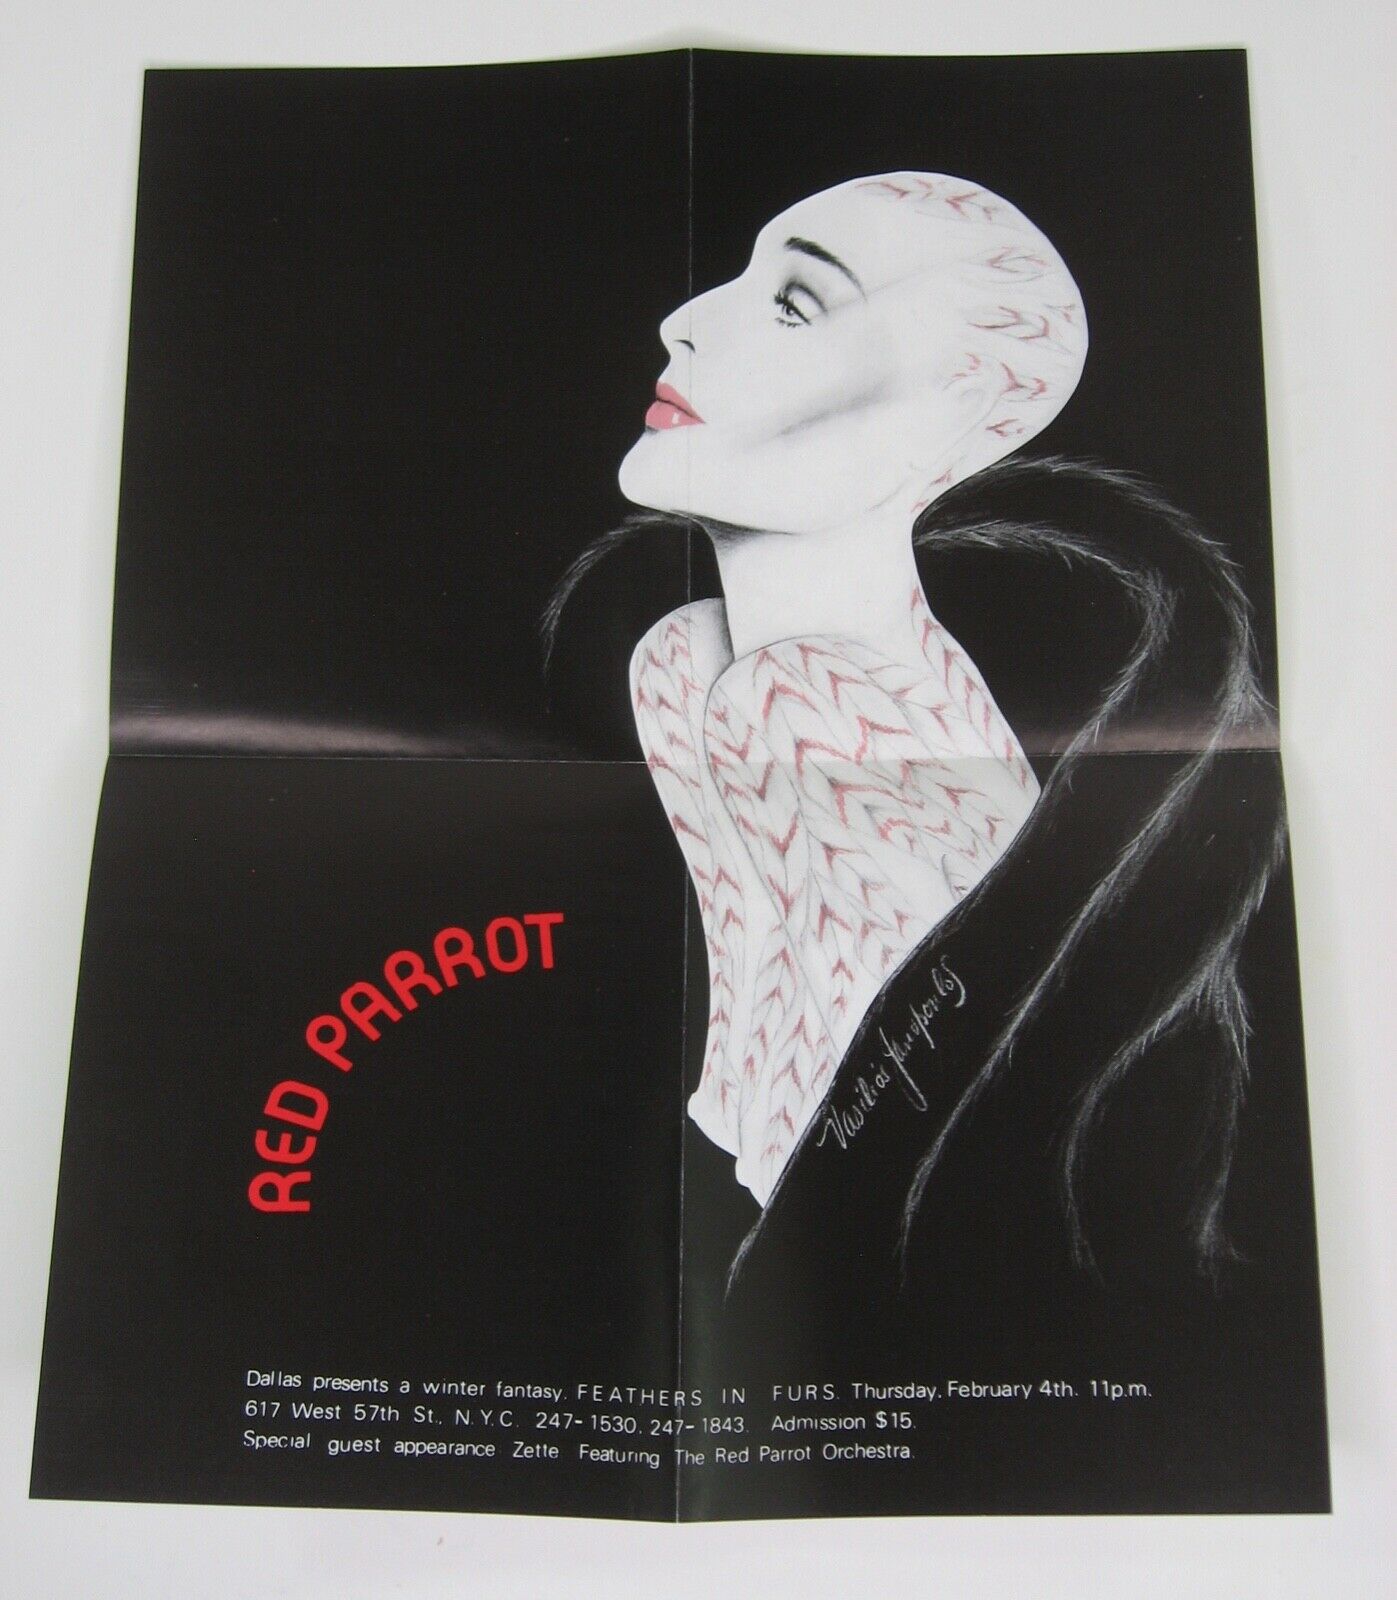 The Red Parrot Nyc Feathers In Furs Invitation Flyer Night Club Disco 1980s Vtg